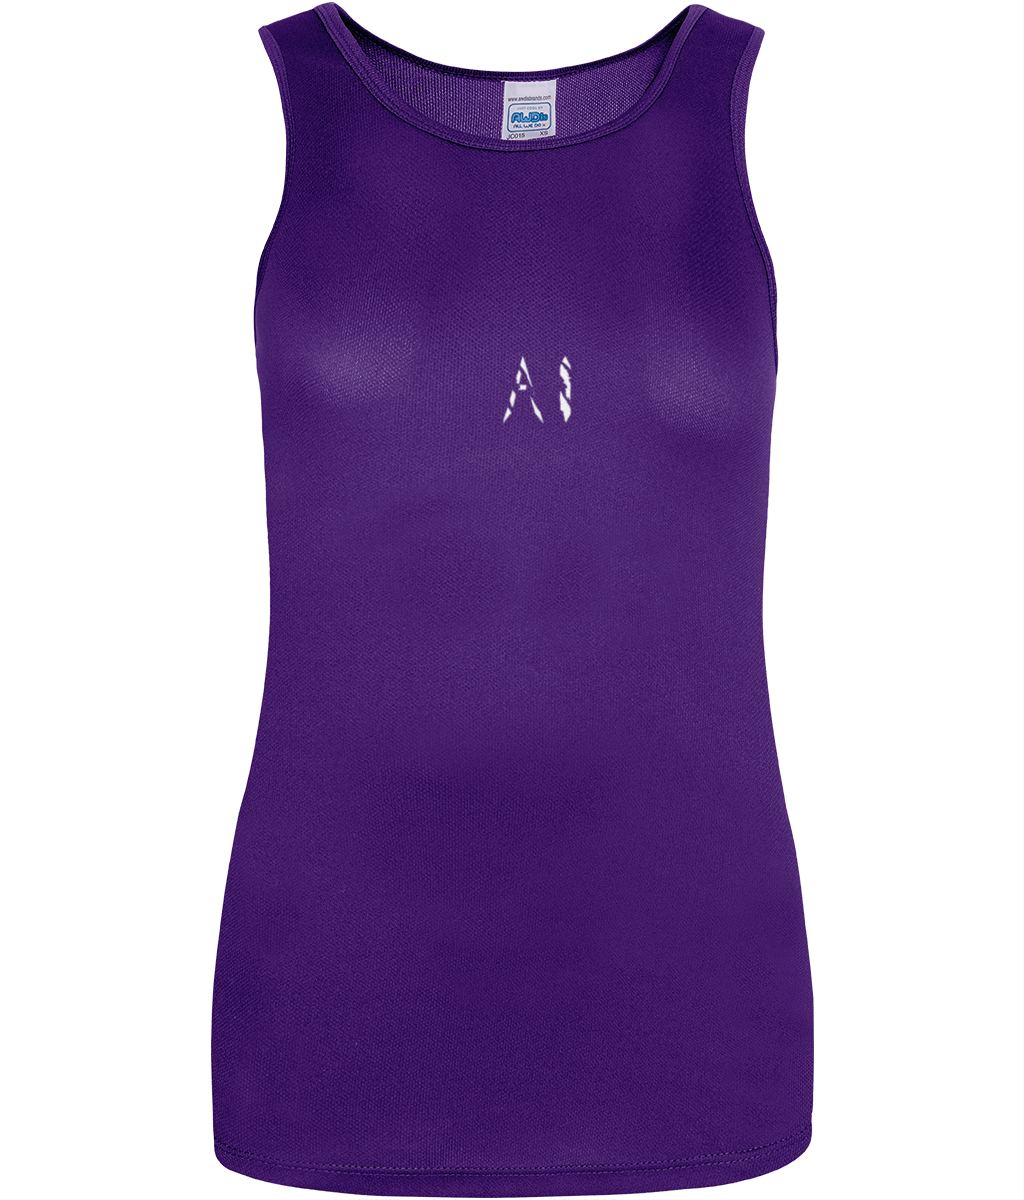 Womens purple Workout Sports Vest with white AI logo in centre chest